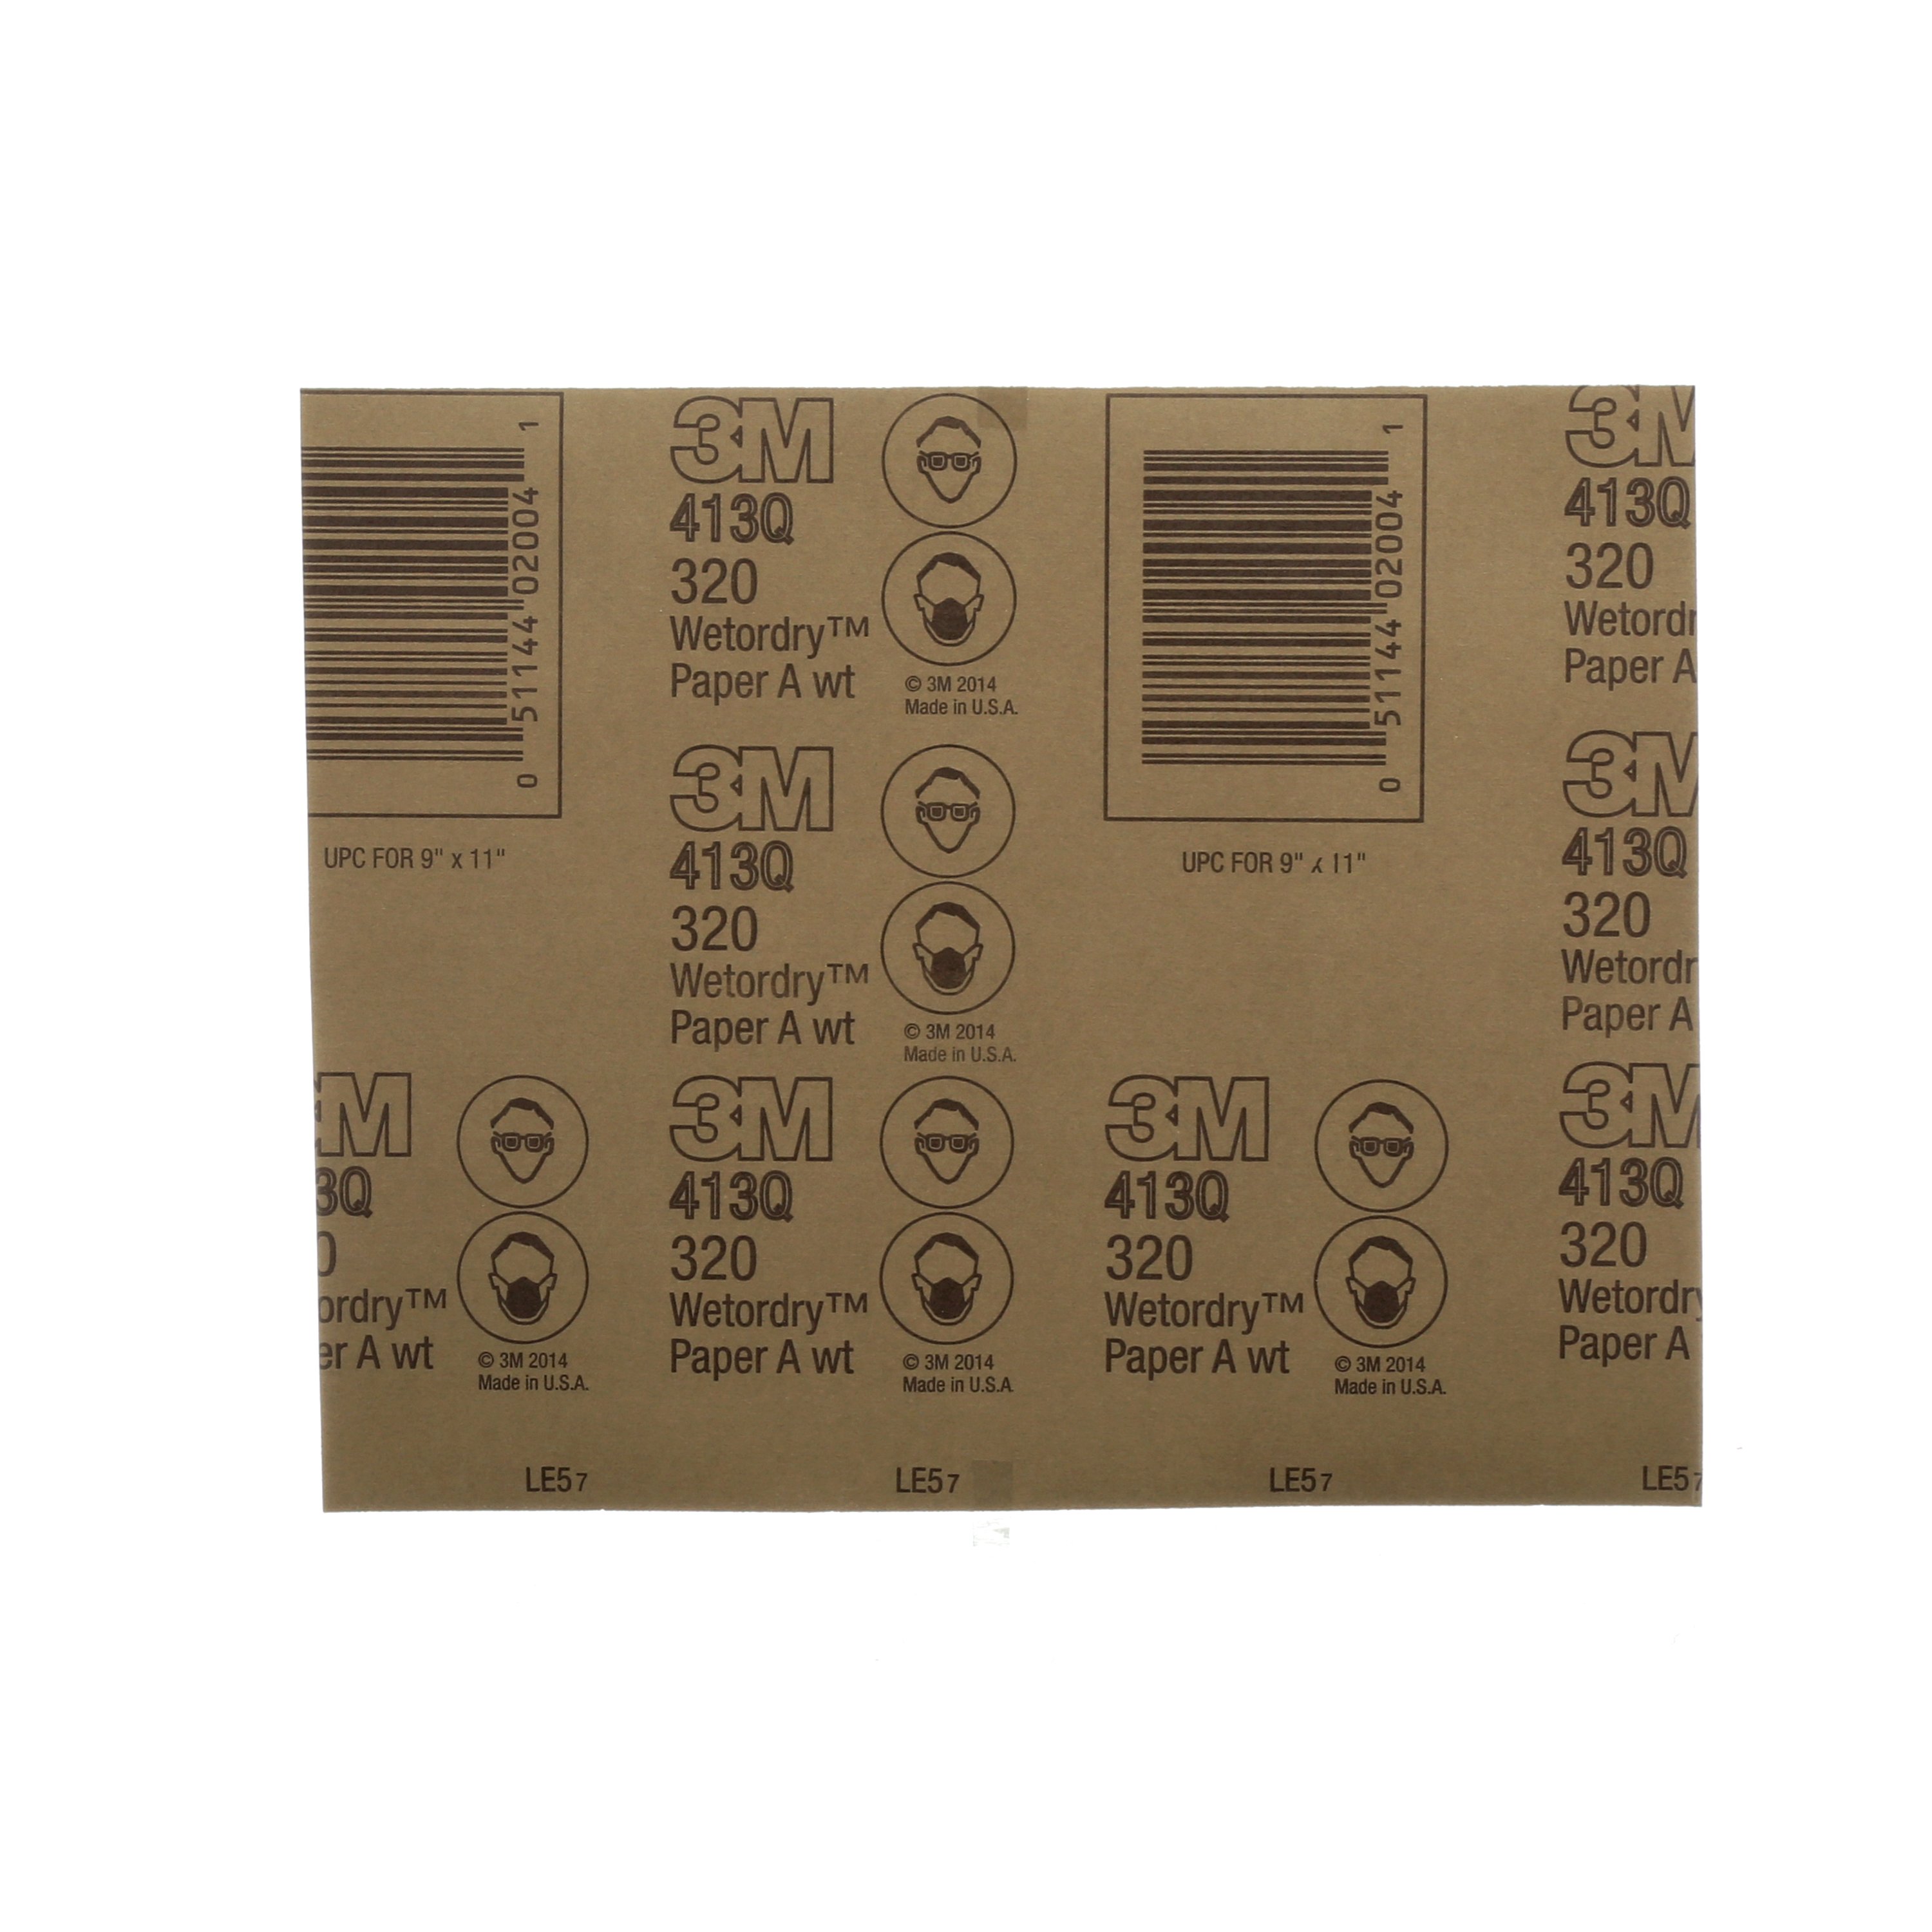 Its flexible, A-weight paper backing provides smooth operation and durability and can conform to the shape of contoured parts for consistent finishing.